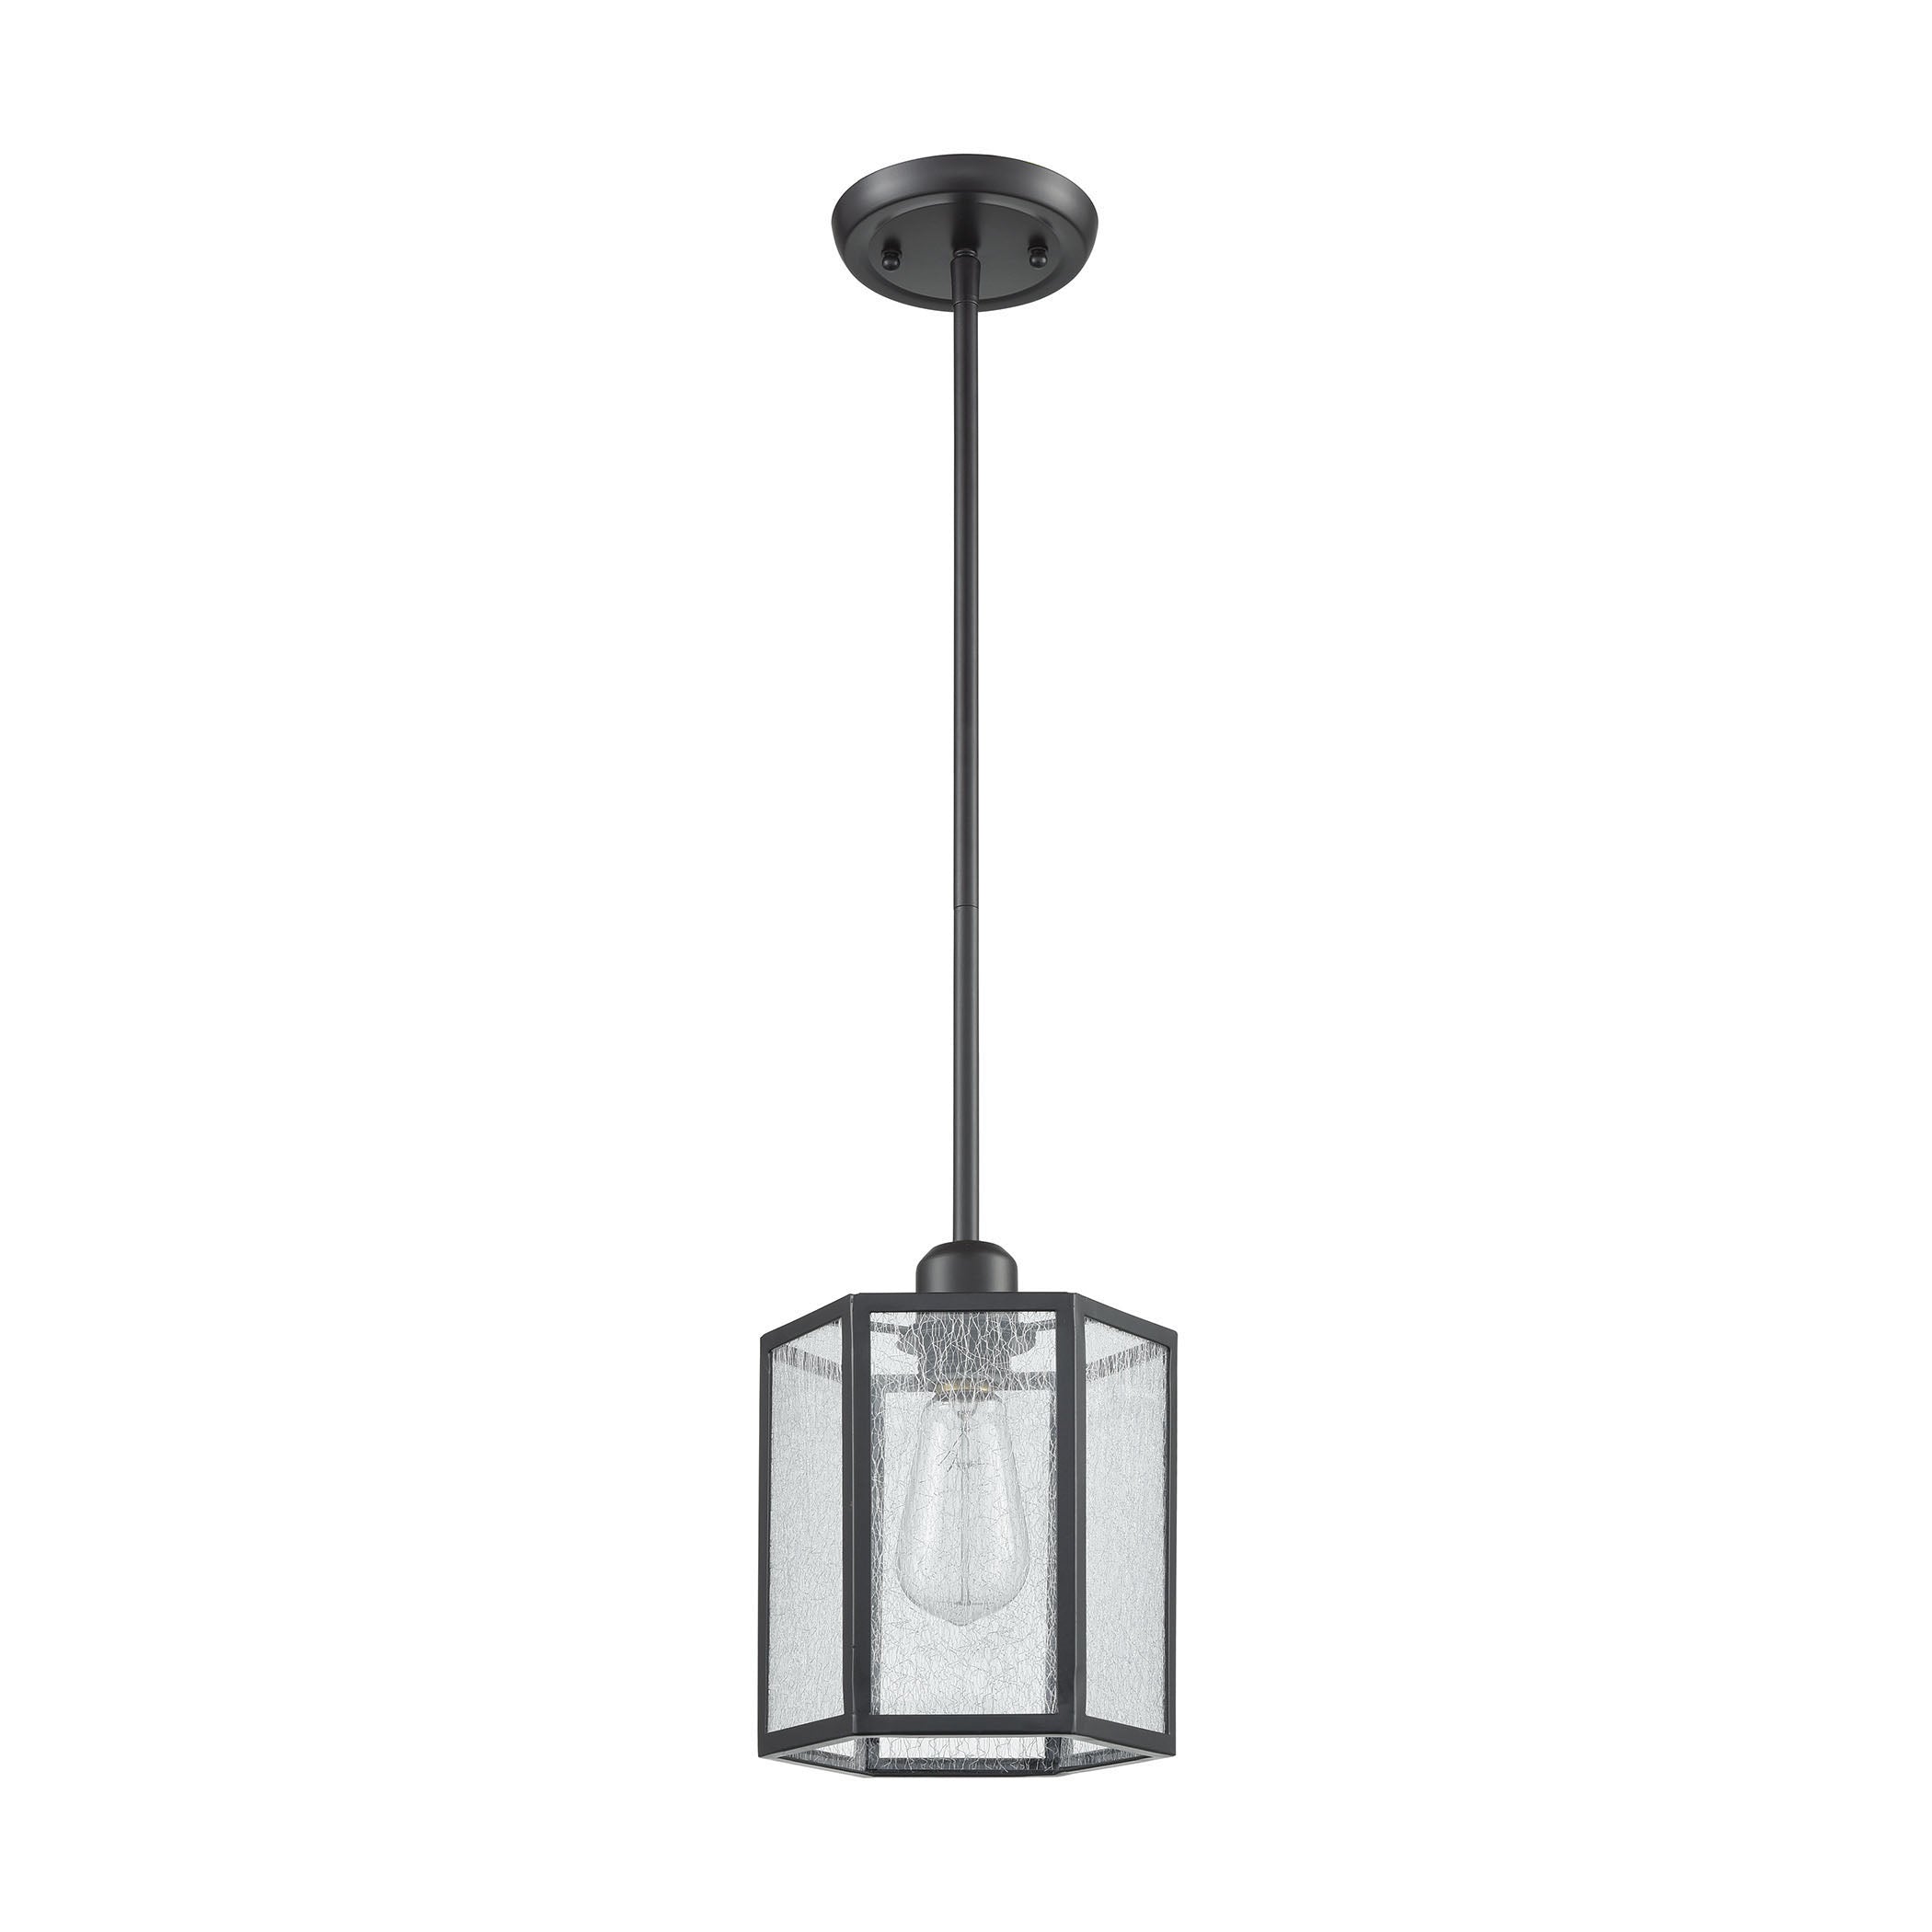 ELK Lighting 10353/1 Spencer 1-Light Mini Pendant in Oil Rubbed Bronze with Translucent Organza PVC Shade